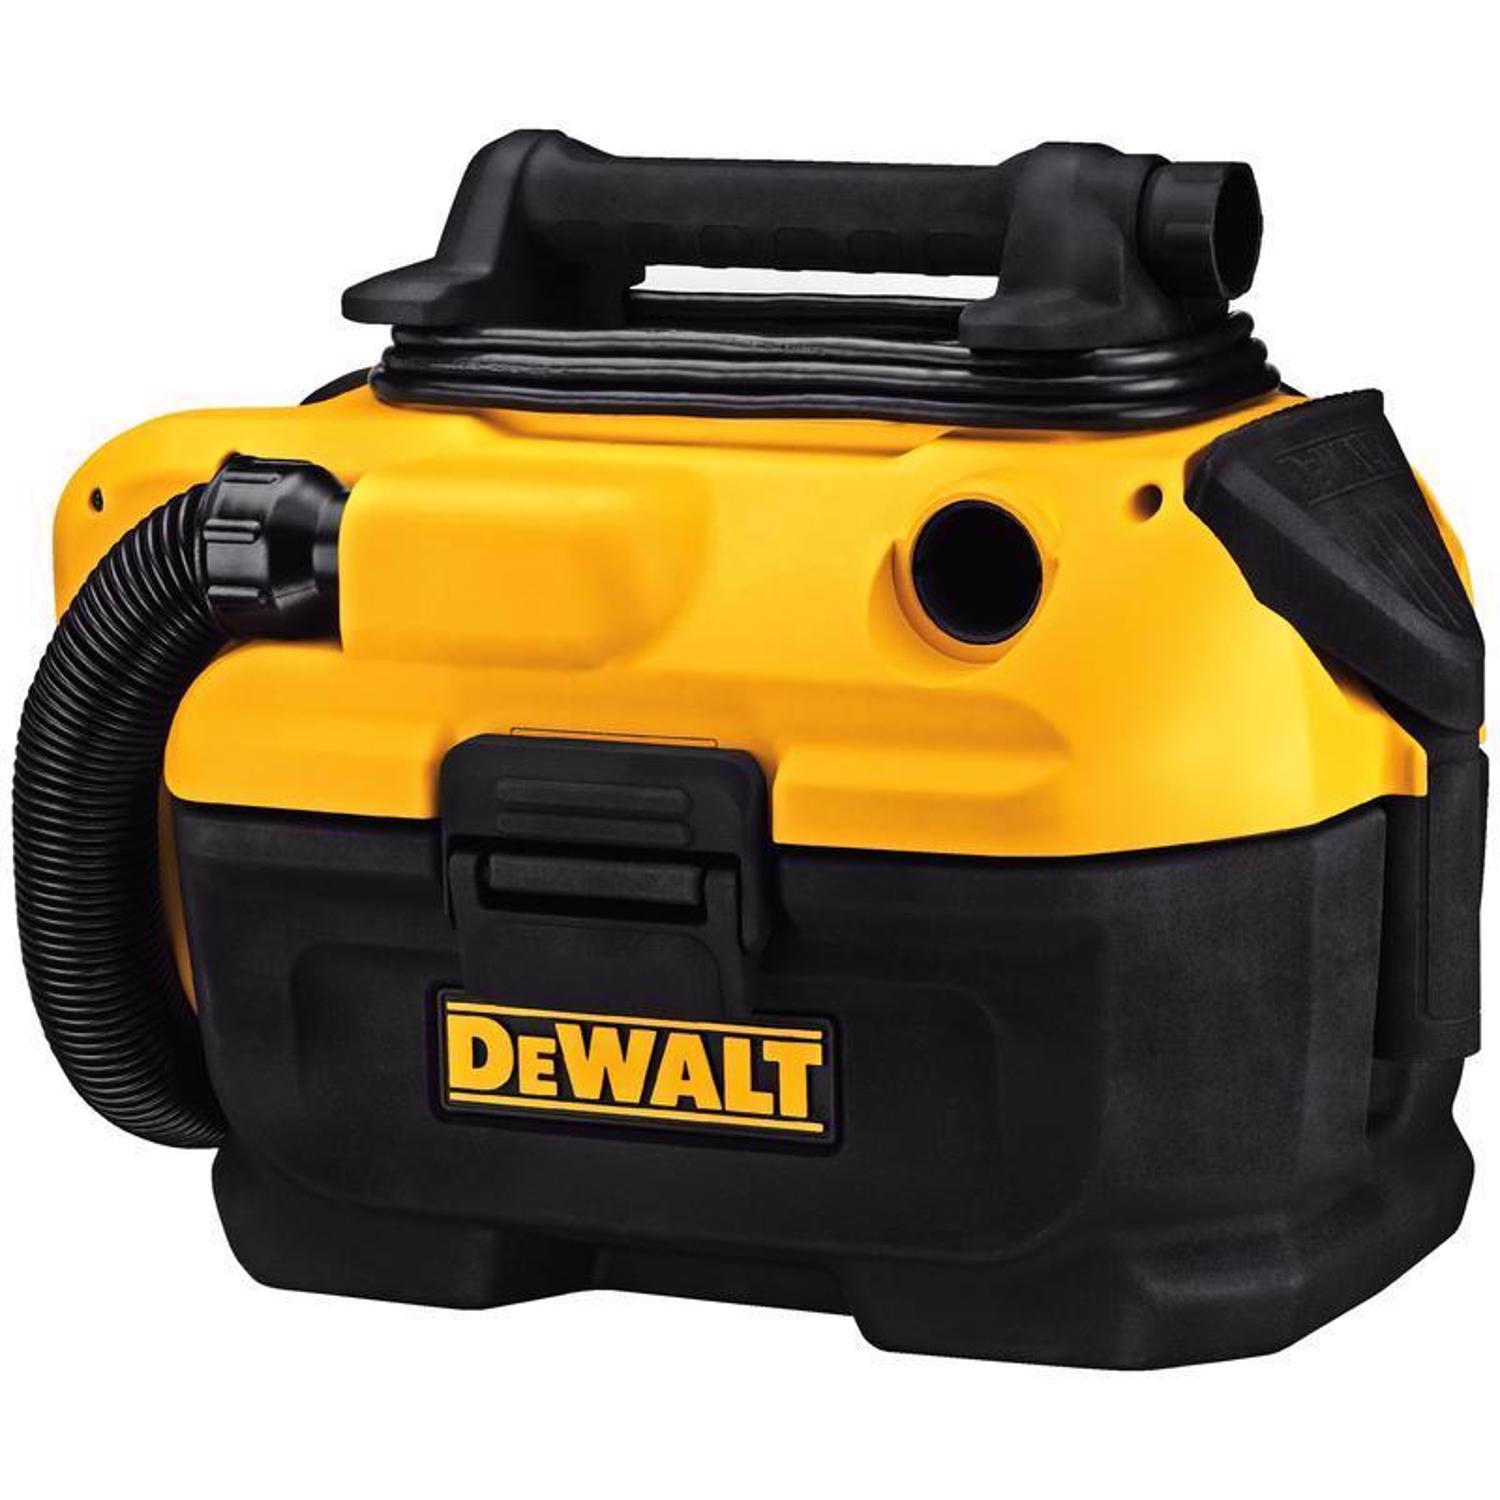 Photos - Baby Hygiene DeWALT 20V MAX 2 gal Corded/Cordless Wet/Dry Vacuum Tool Only 8 amps 20 V 